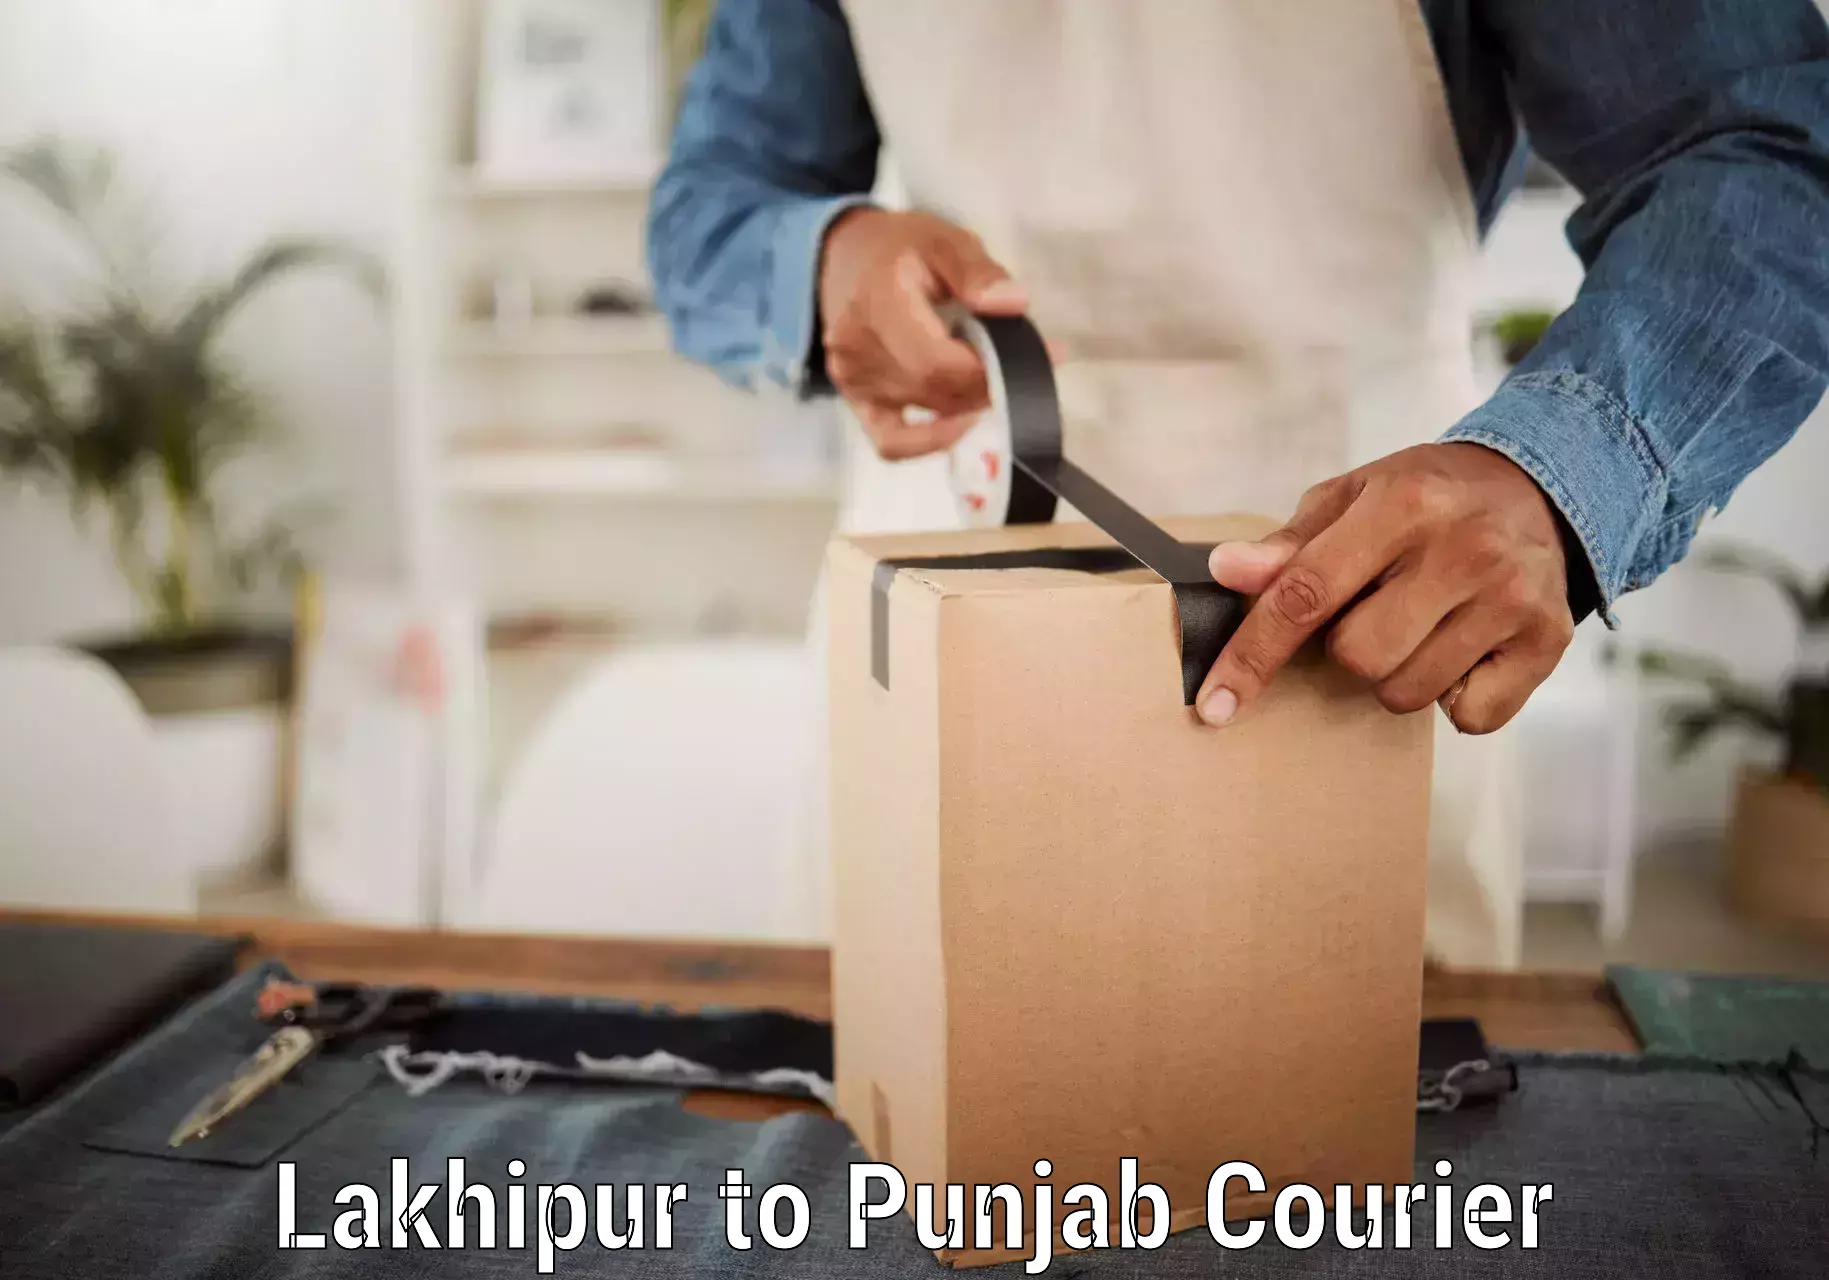 High value parcel delivery in Lakhipur to Dinanagar